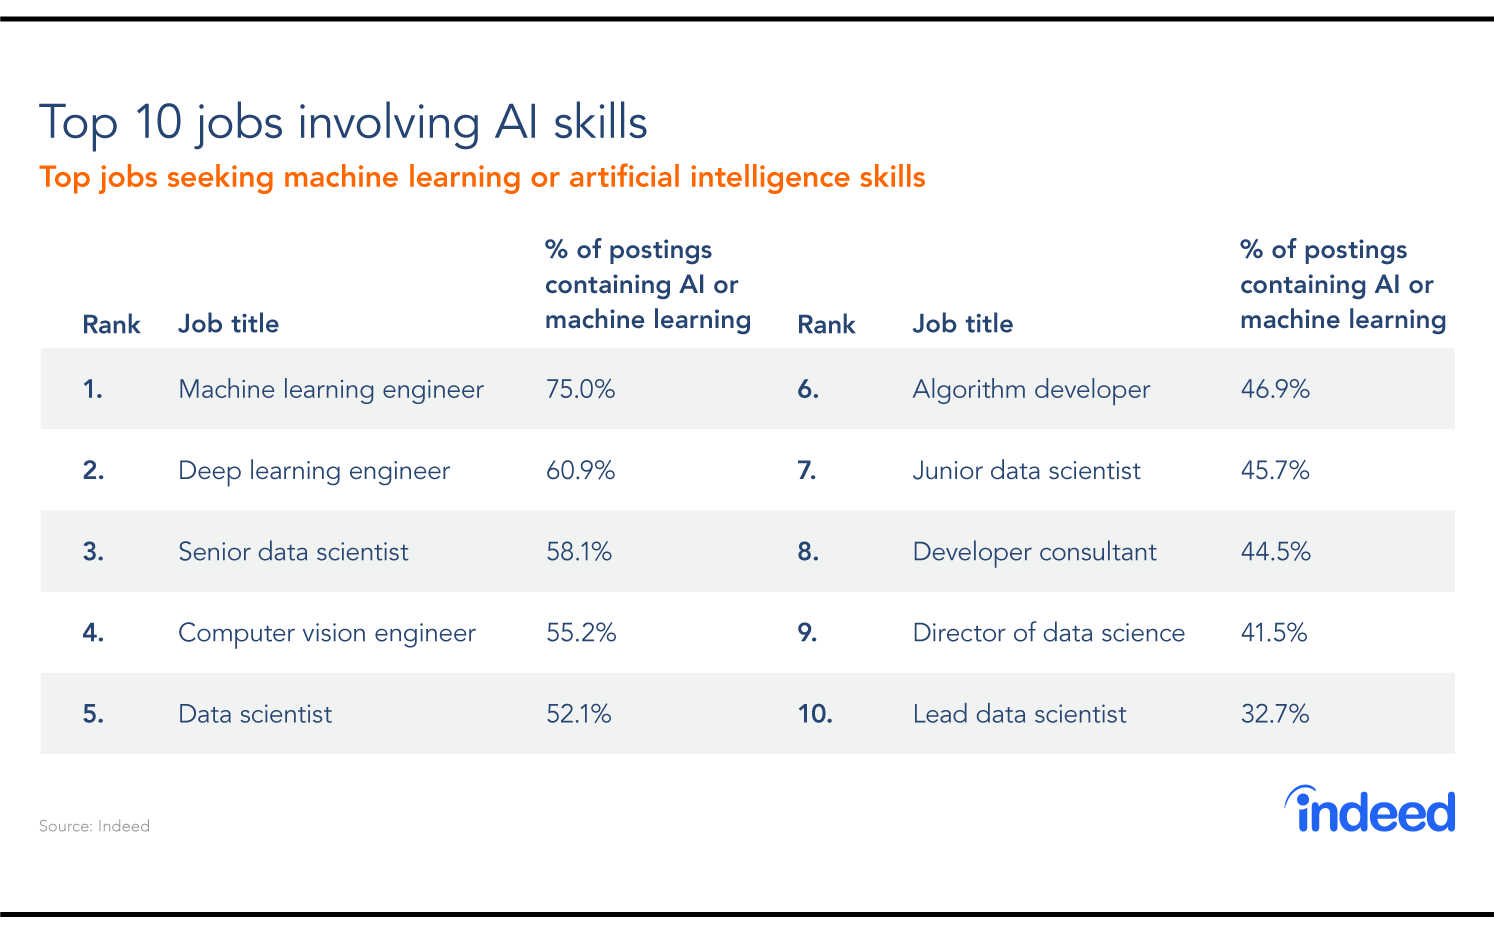 Machine learning and deep learning engineers rule the top 10 AI jobs list